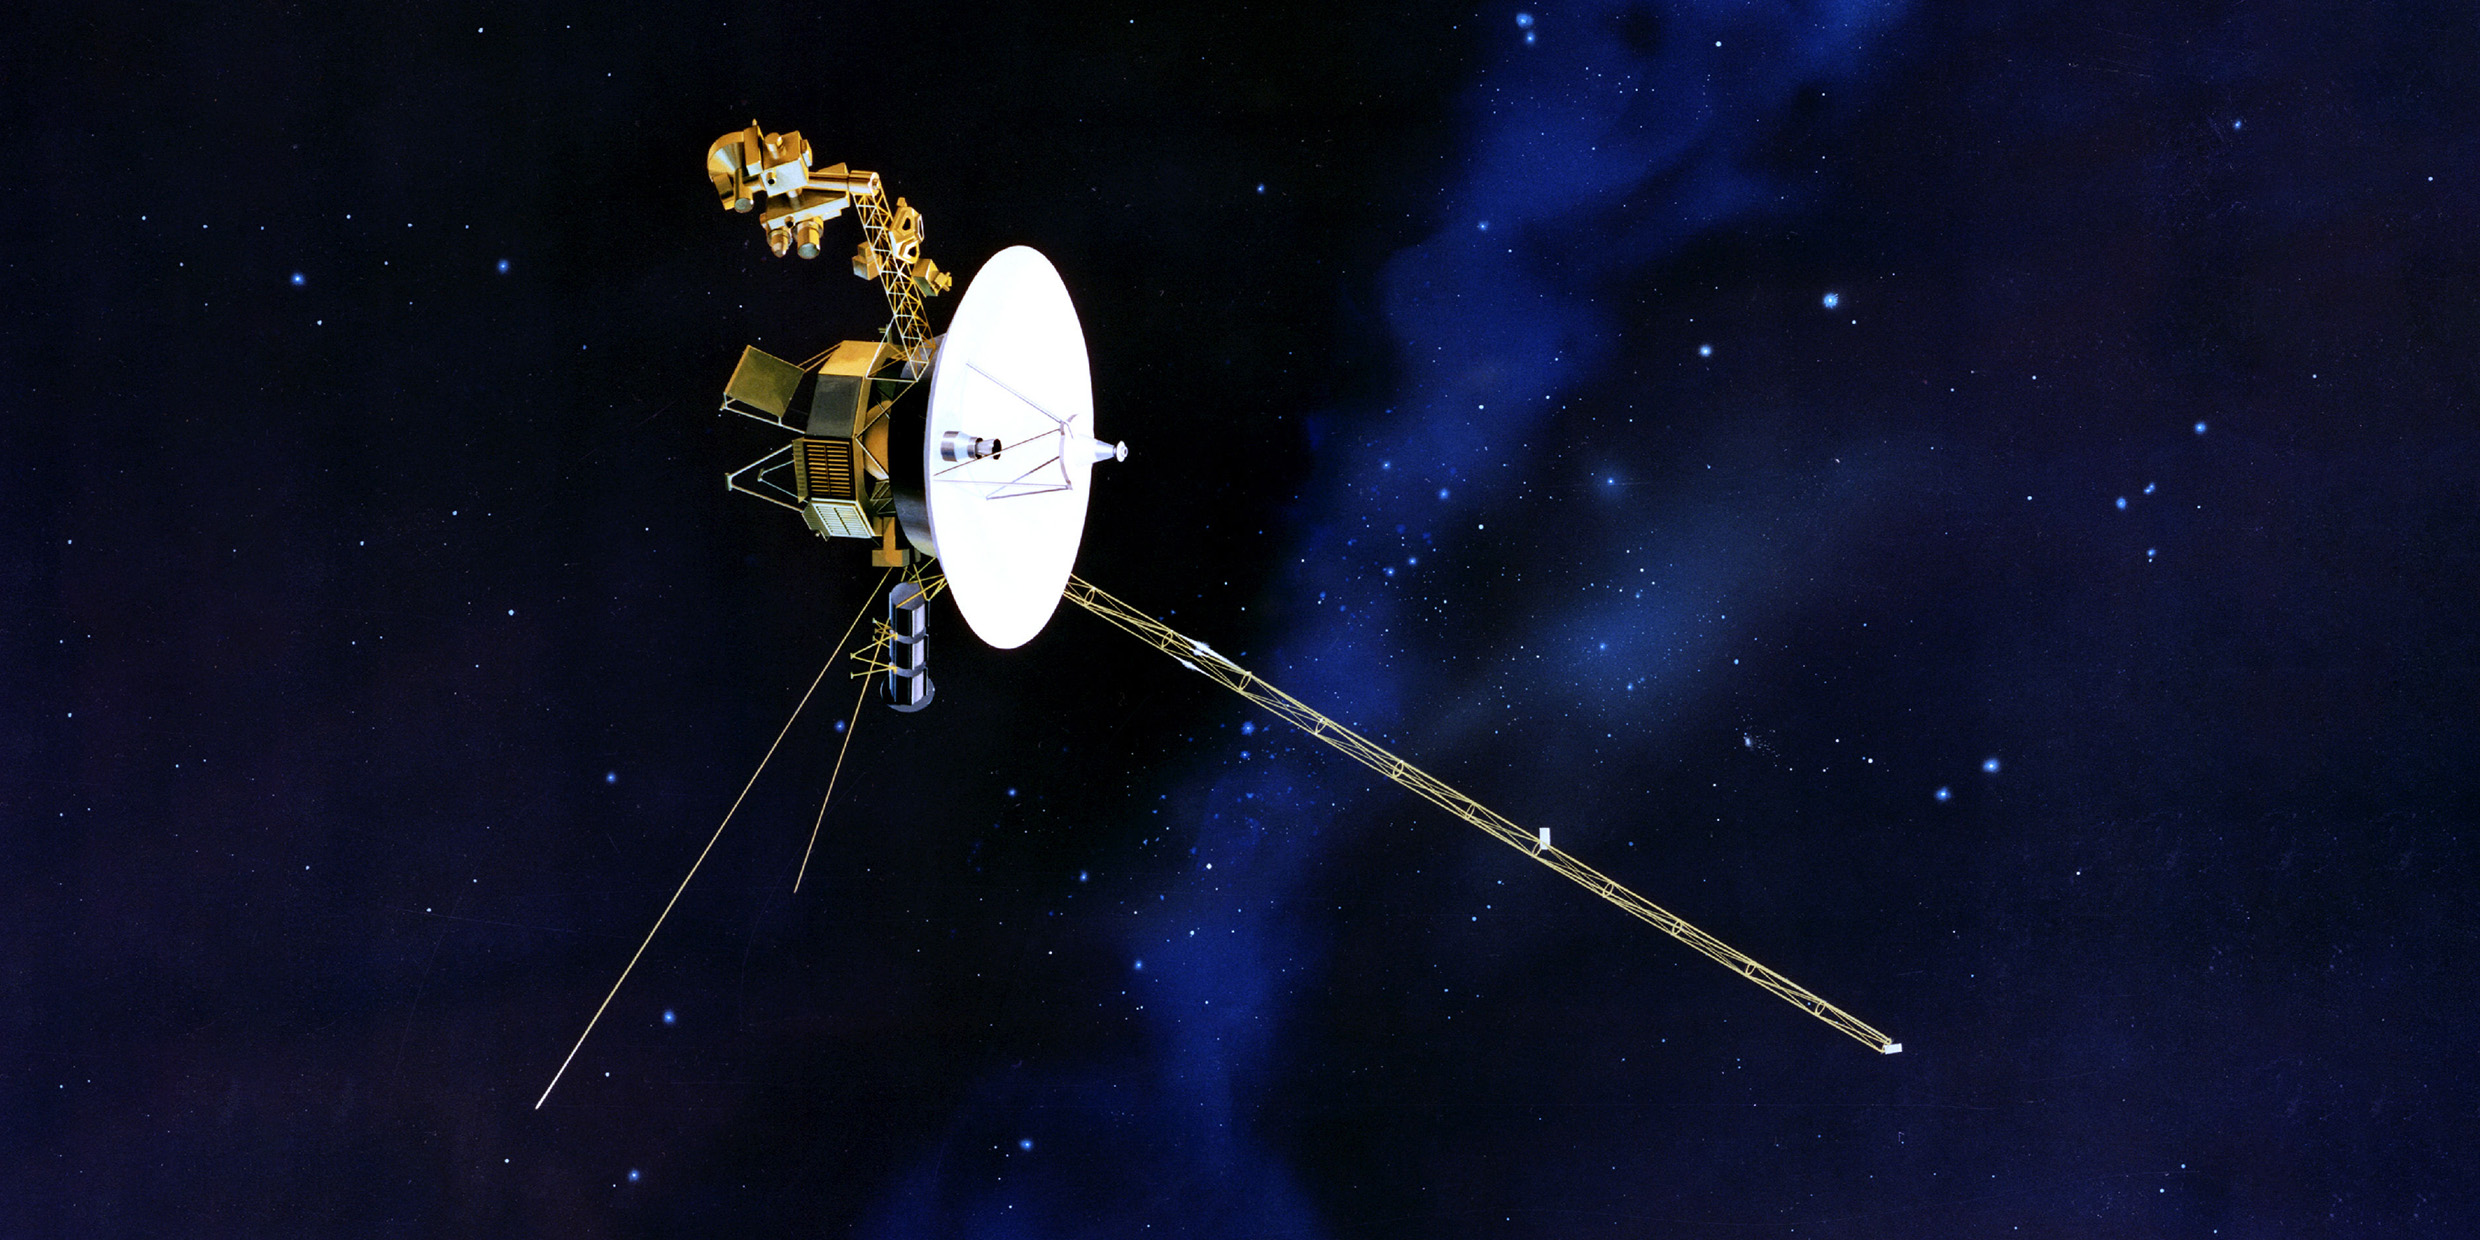 Image of Voyager spacecraft